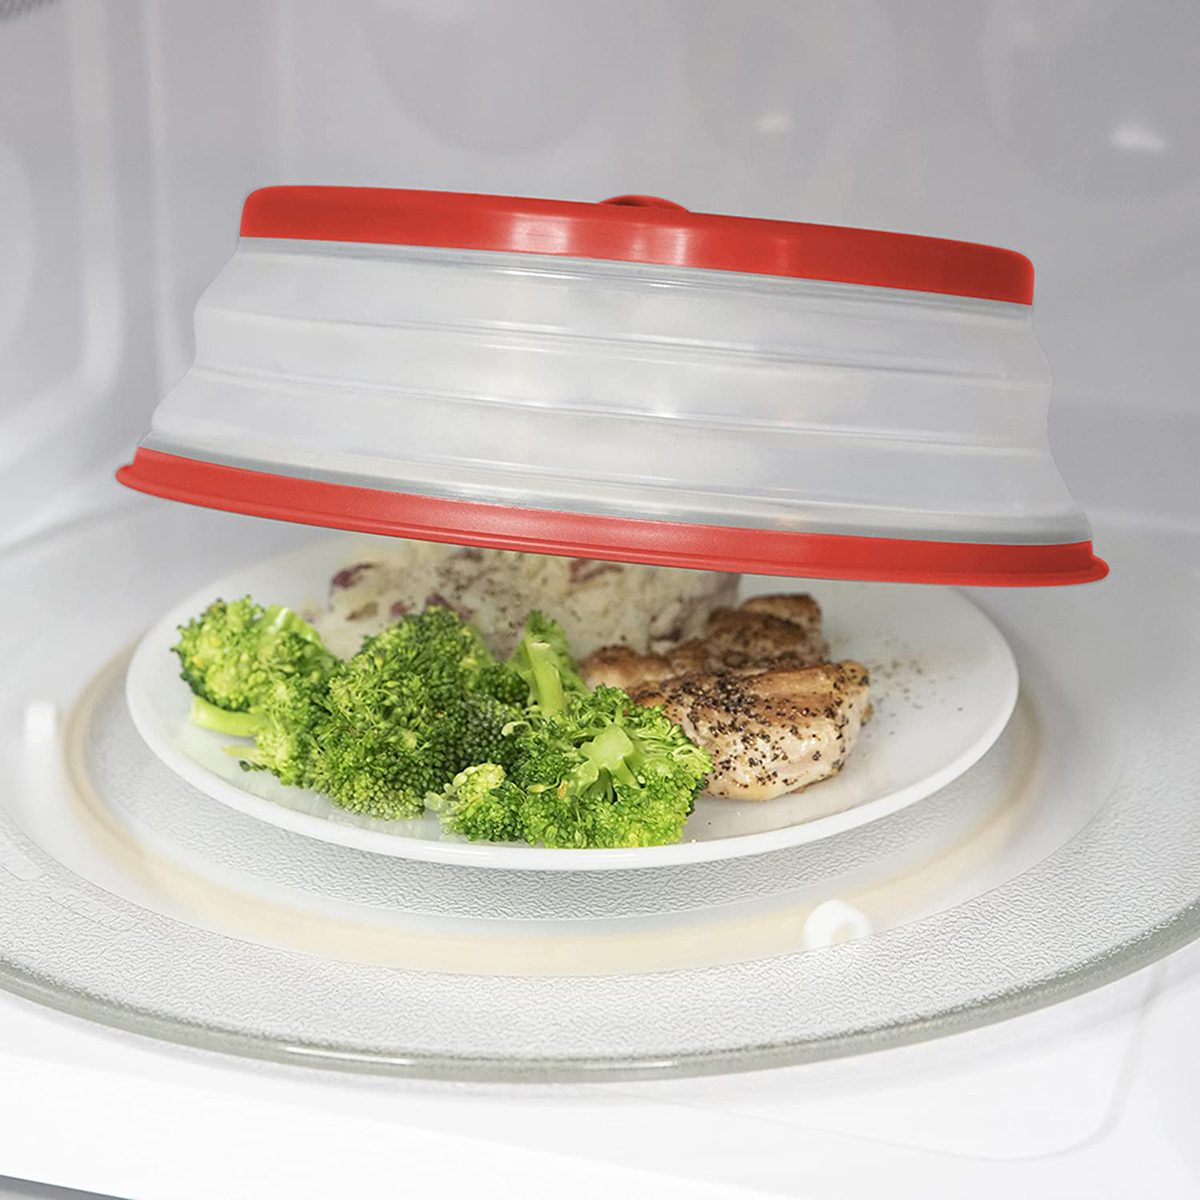 Collapsible Microwave Cover - A cover for use in the microwave